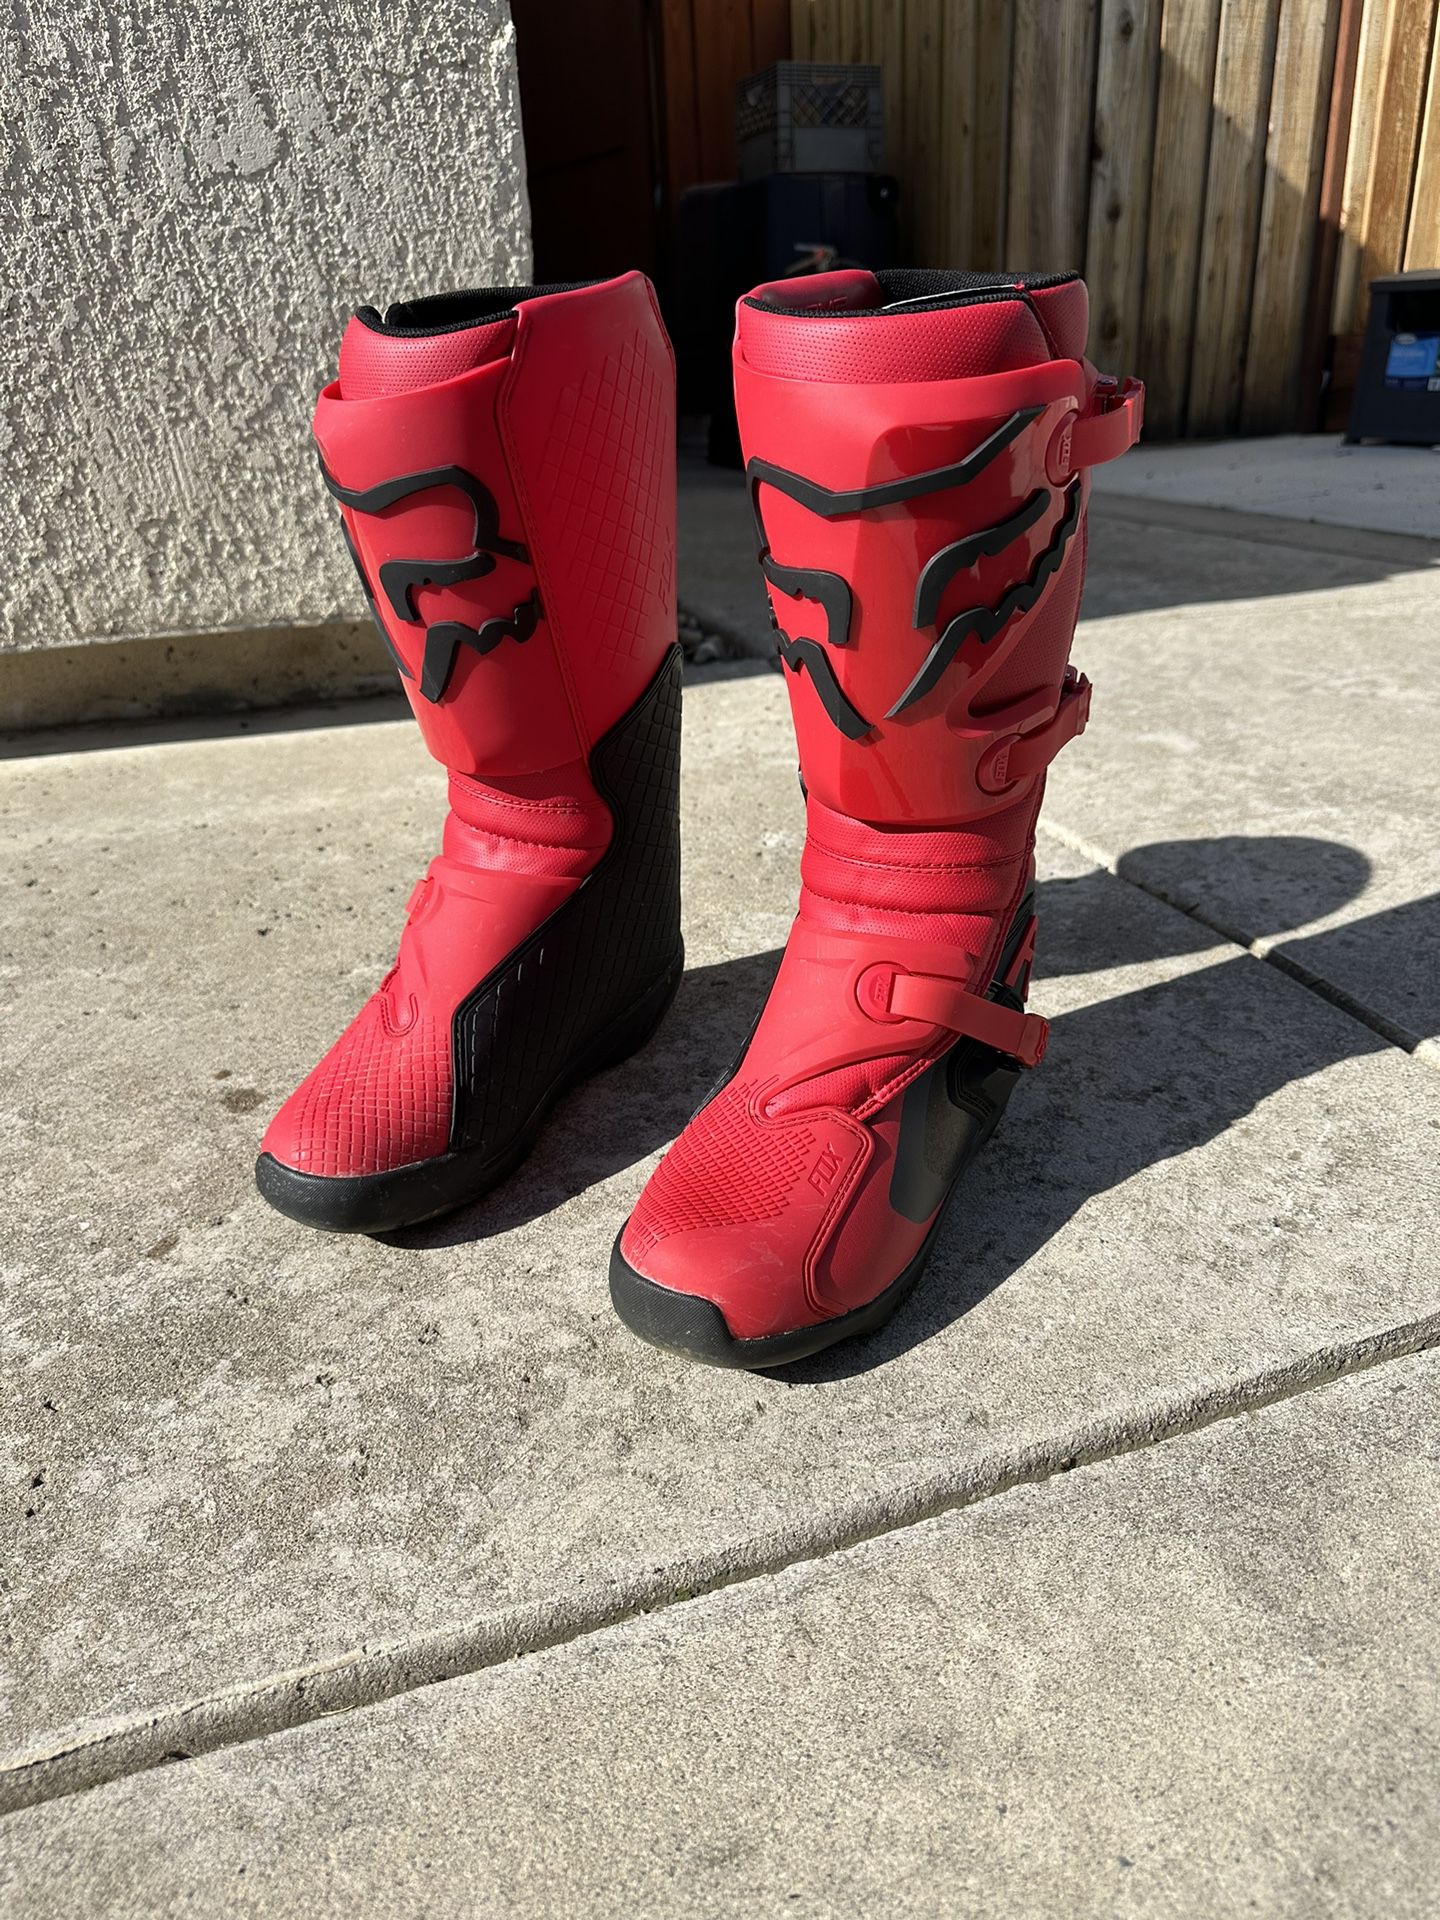 Brand New Mens Dirtbike Boots